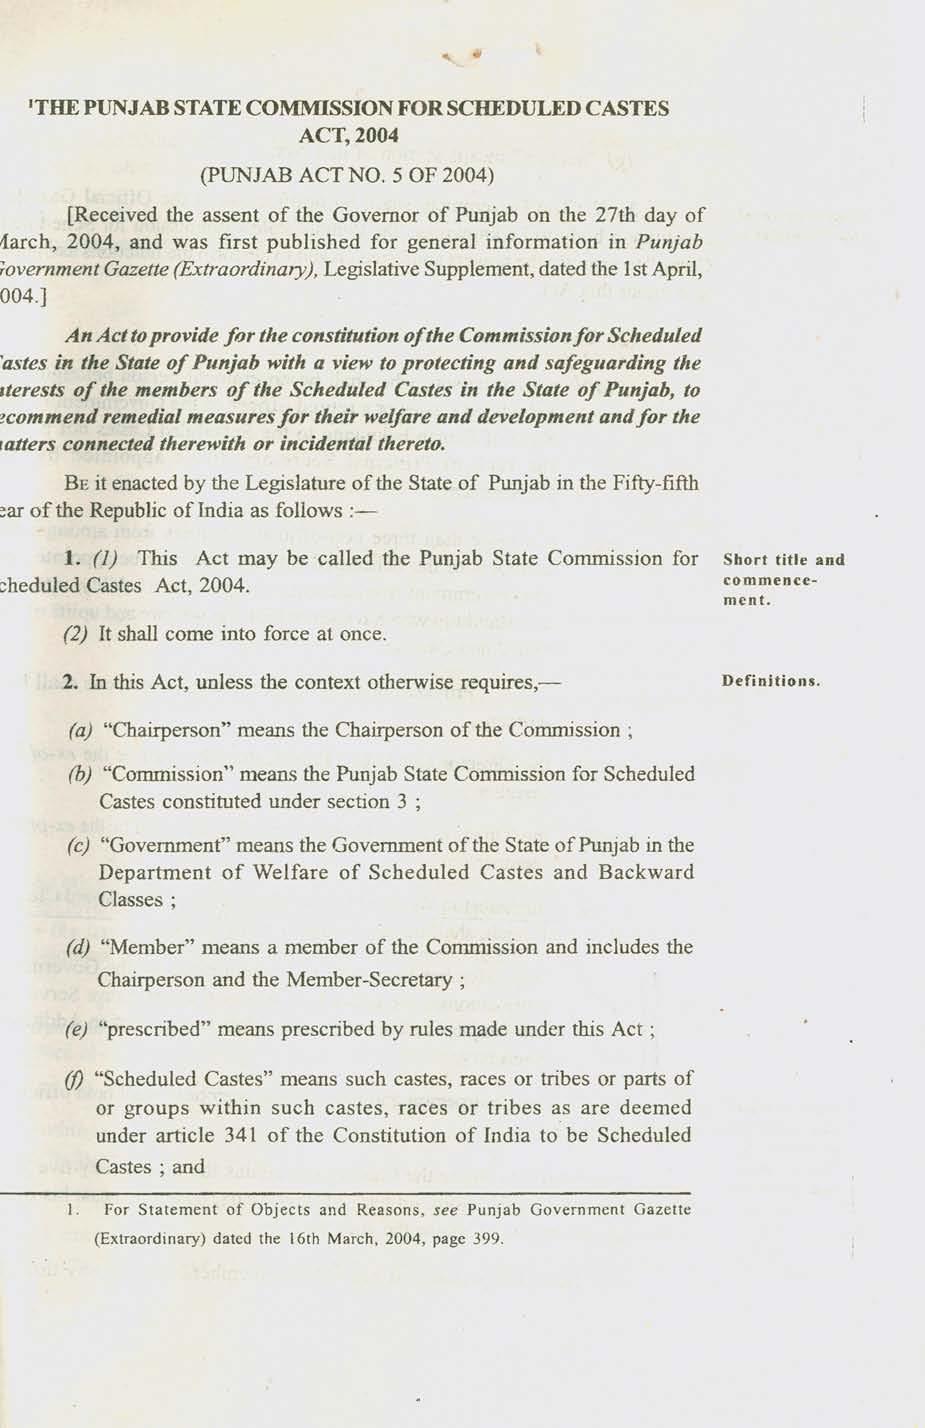 ITHE PUNJAB STATE COMMISSION FOR SCHEDULED CASTES ACT, 2004 (punjab ACT NO.